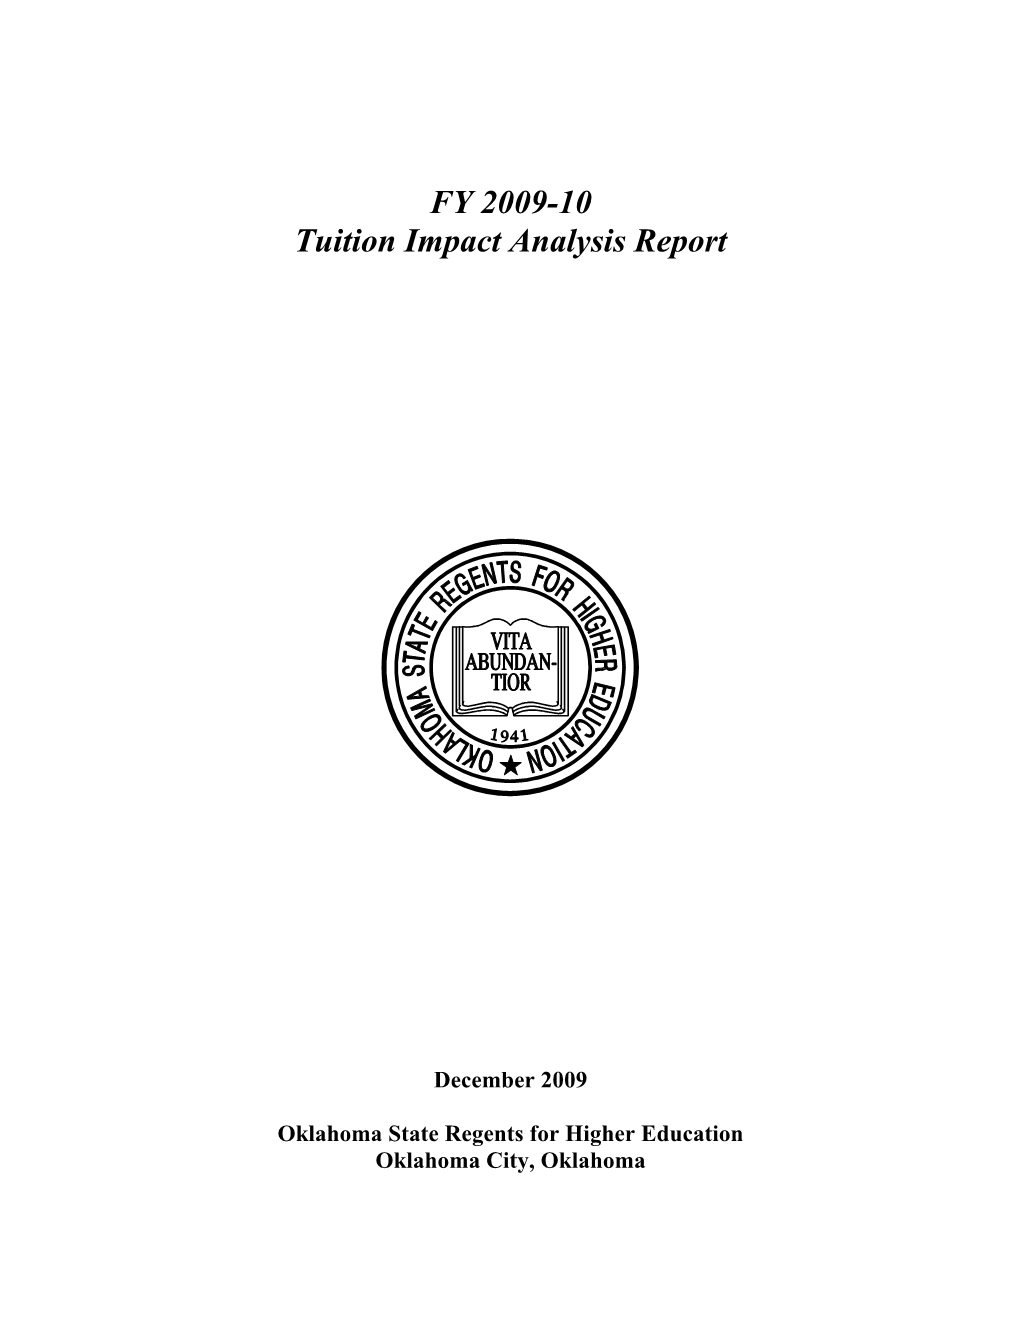 Tuition Impact Analysis Report, FY 2009-10